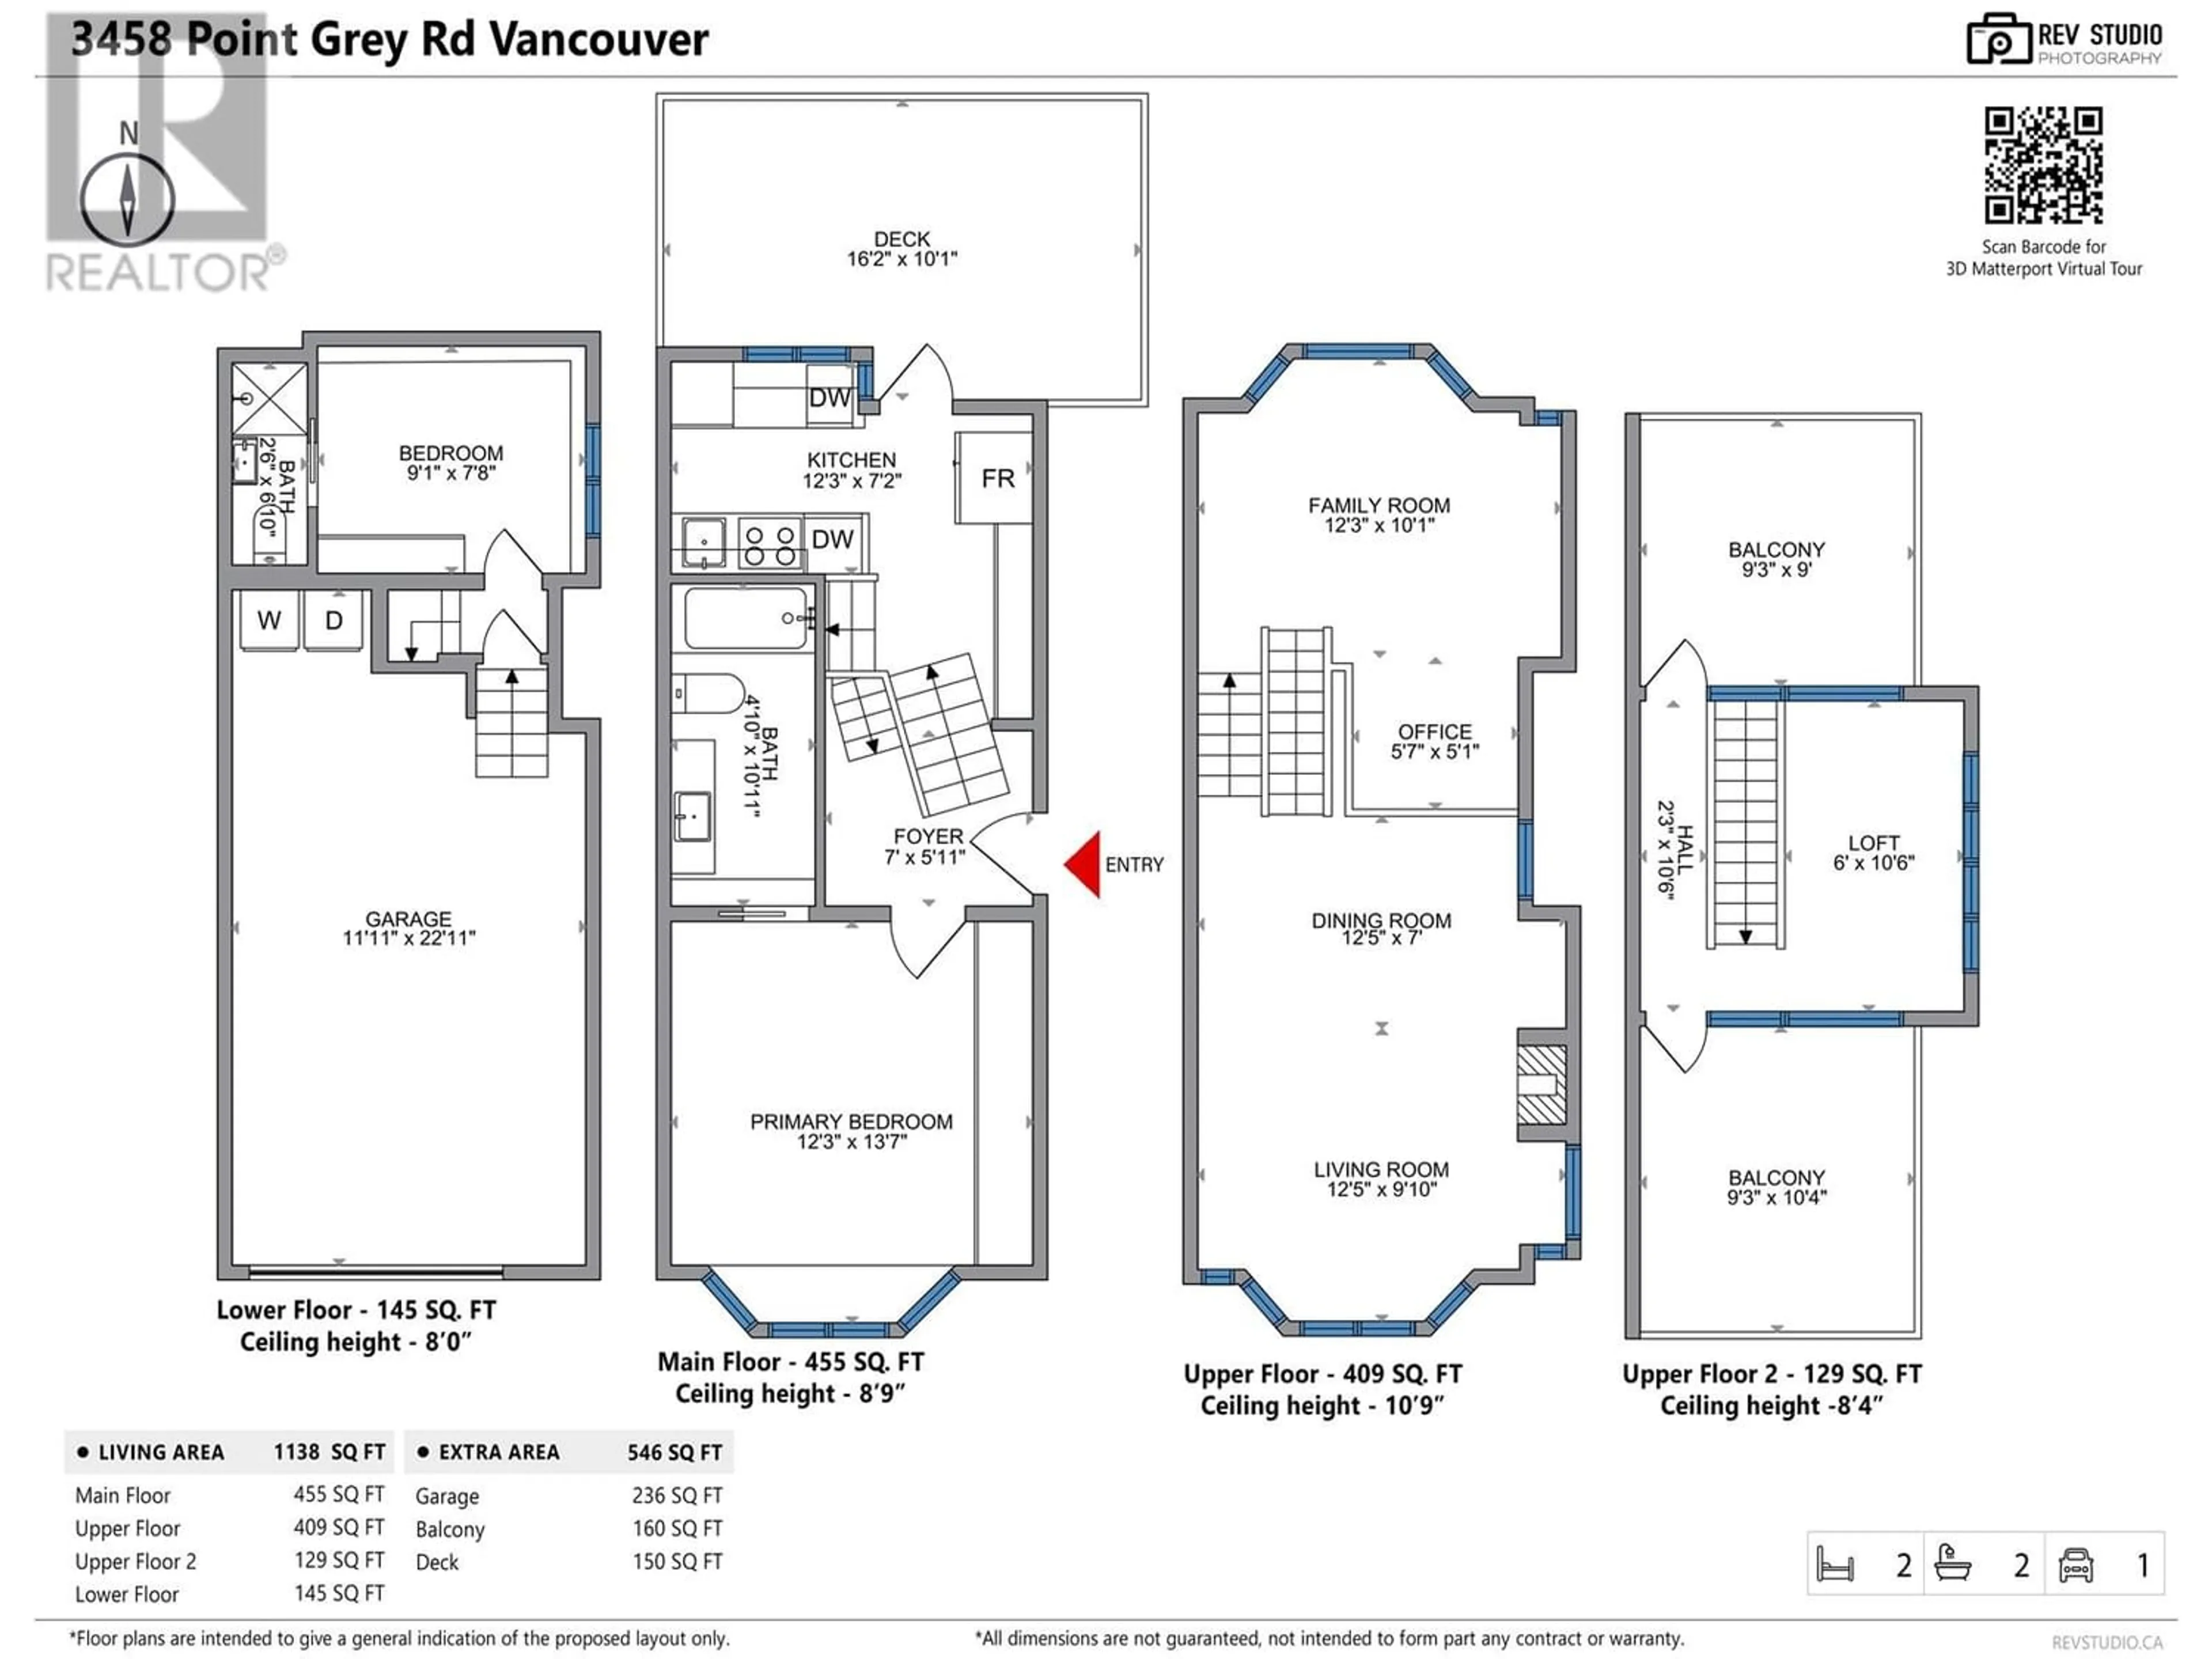 Floor plan for 3458 POINT GREY ROAD, Vancouver British Columbia V6R1A5